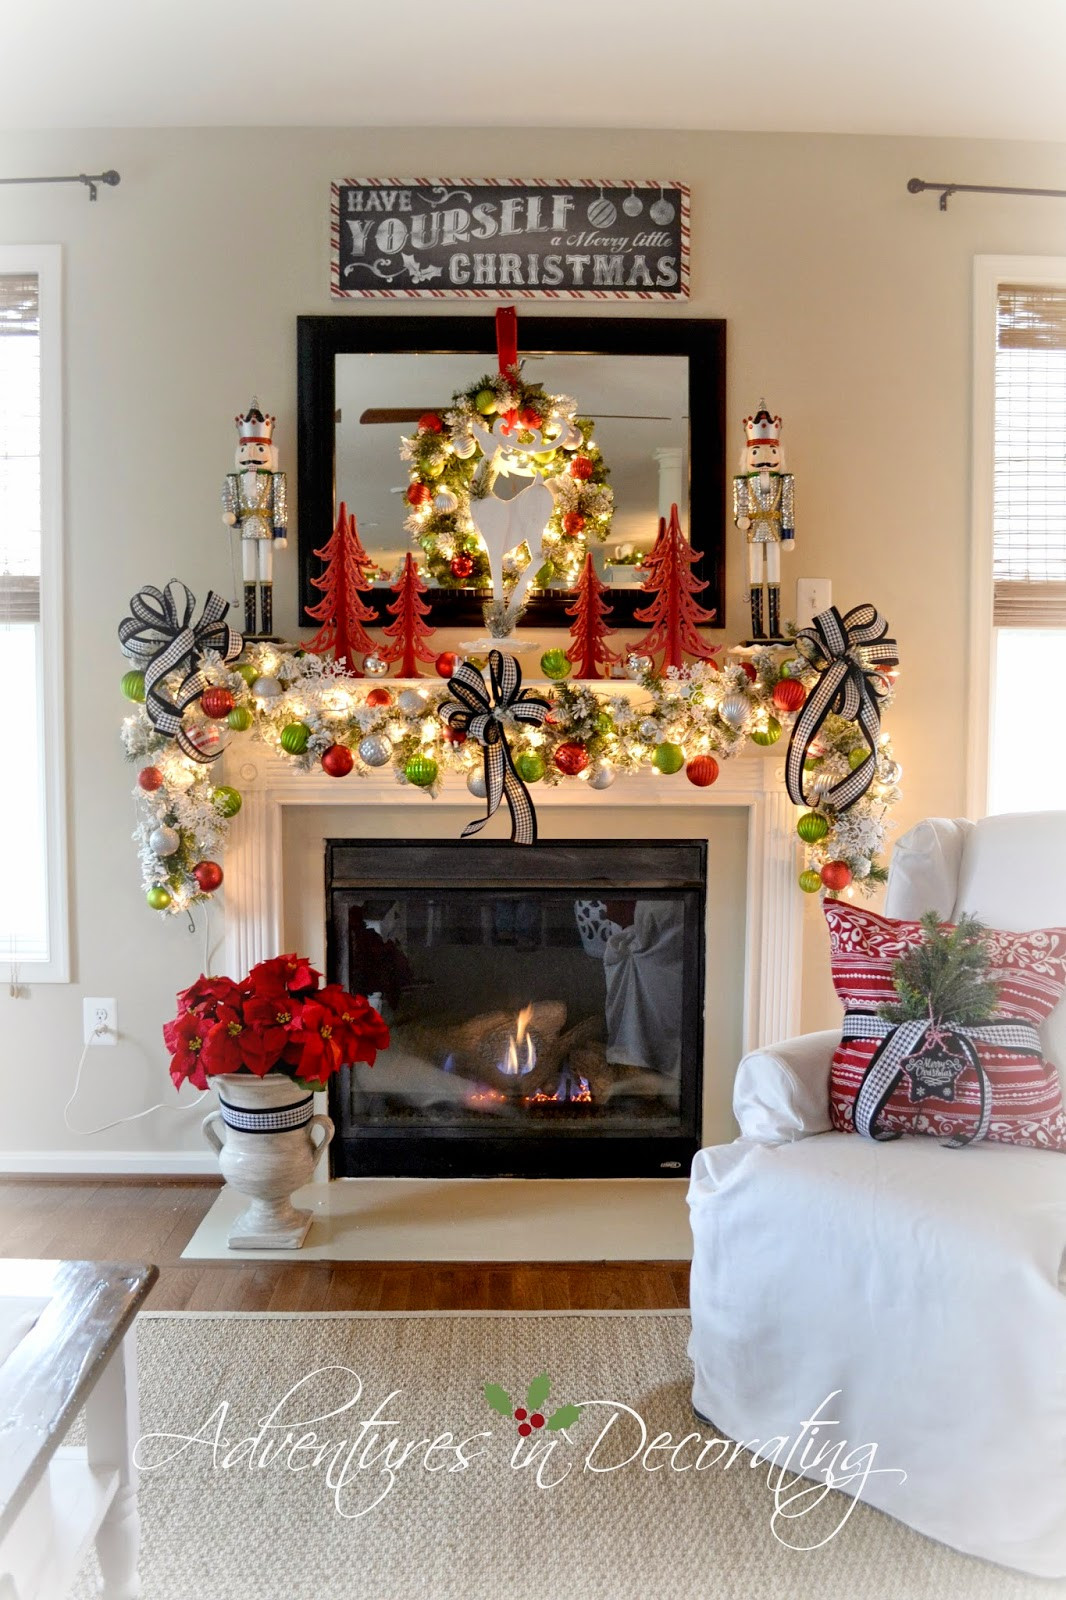 Fireplace Mantel Christmas
 Adventures in Decorating Our 2014 Christmas Mantel and